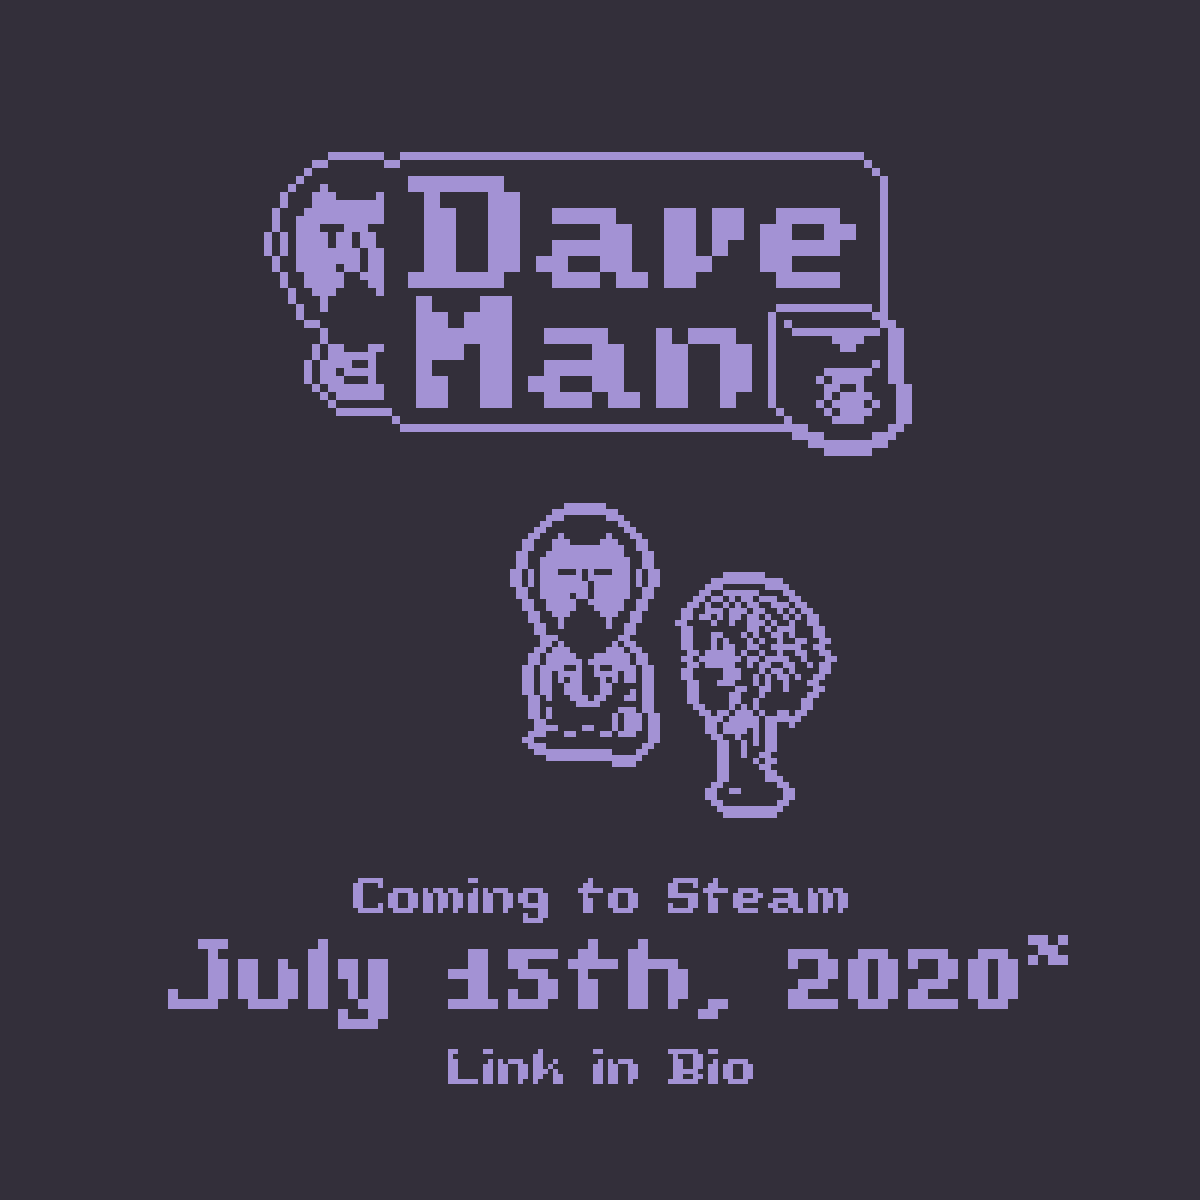 Dave-Man Release Notice